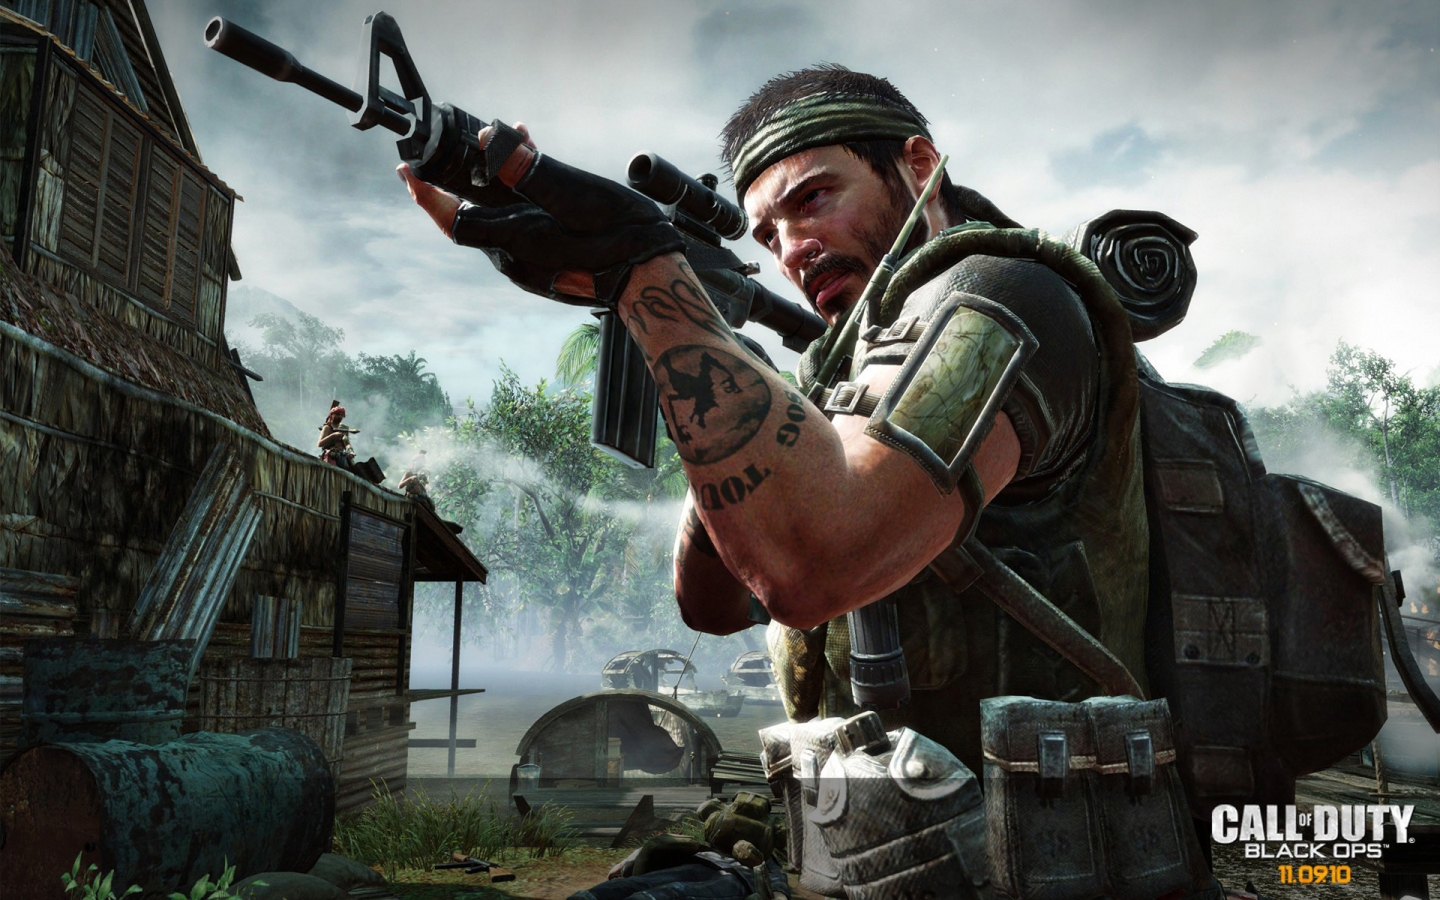 Call of Duty Black Ops Soldier for 1440 x 900 widescreen resolution